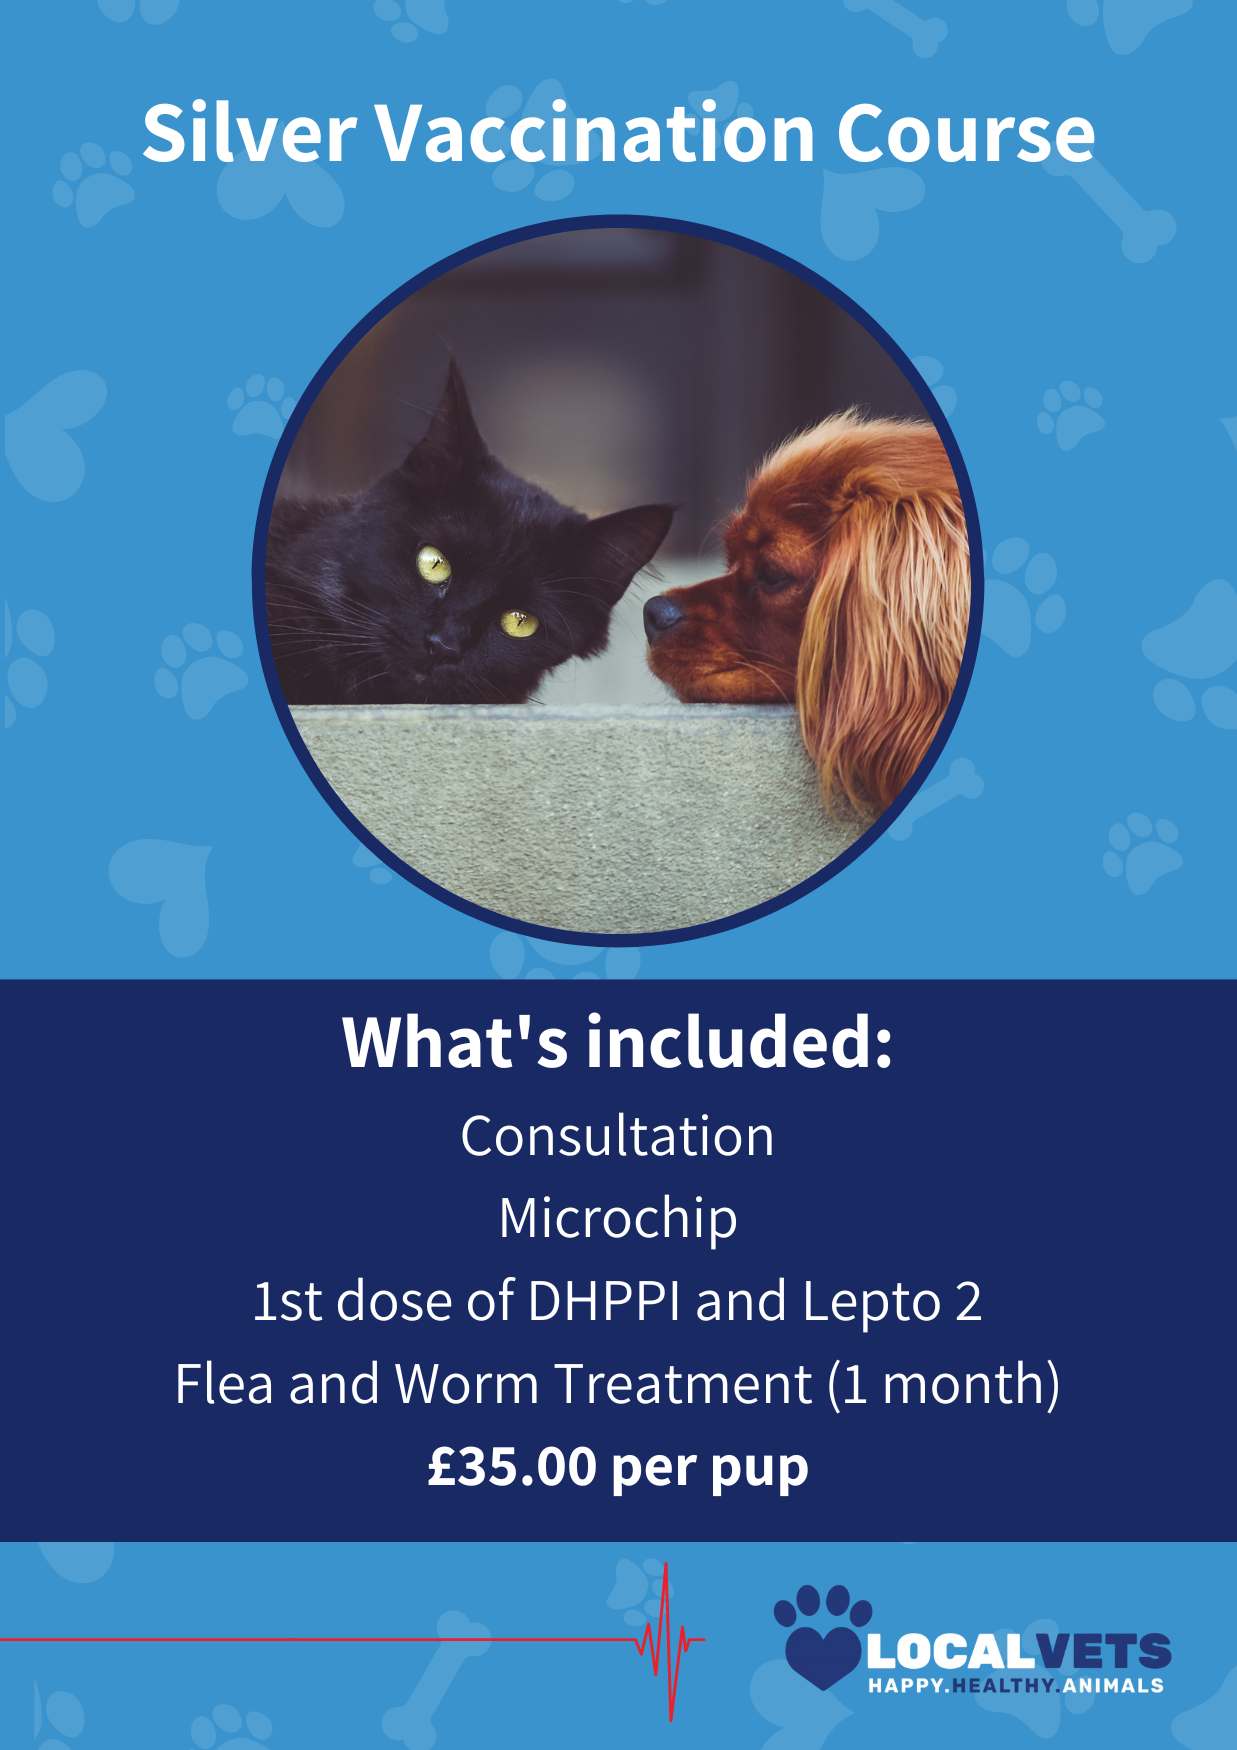 Silver vaccination package available at Local Vets